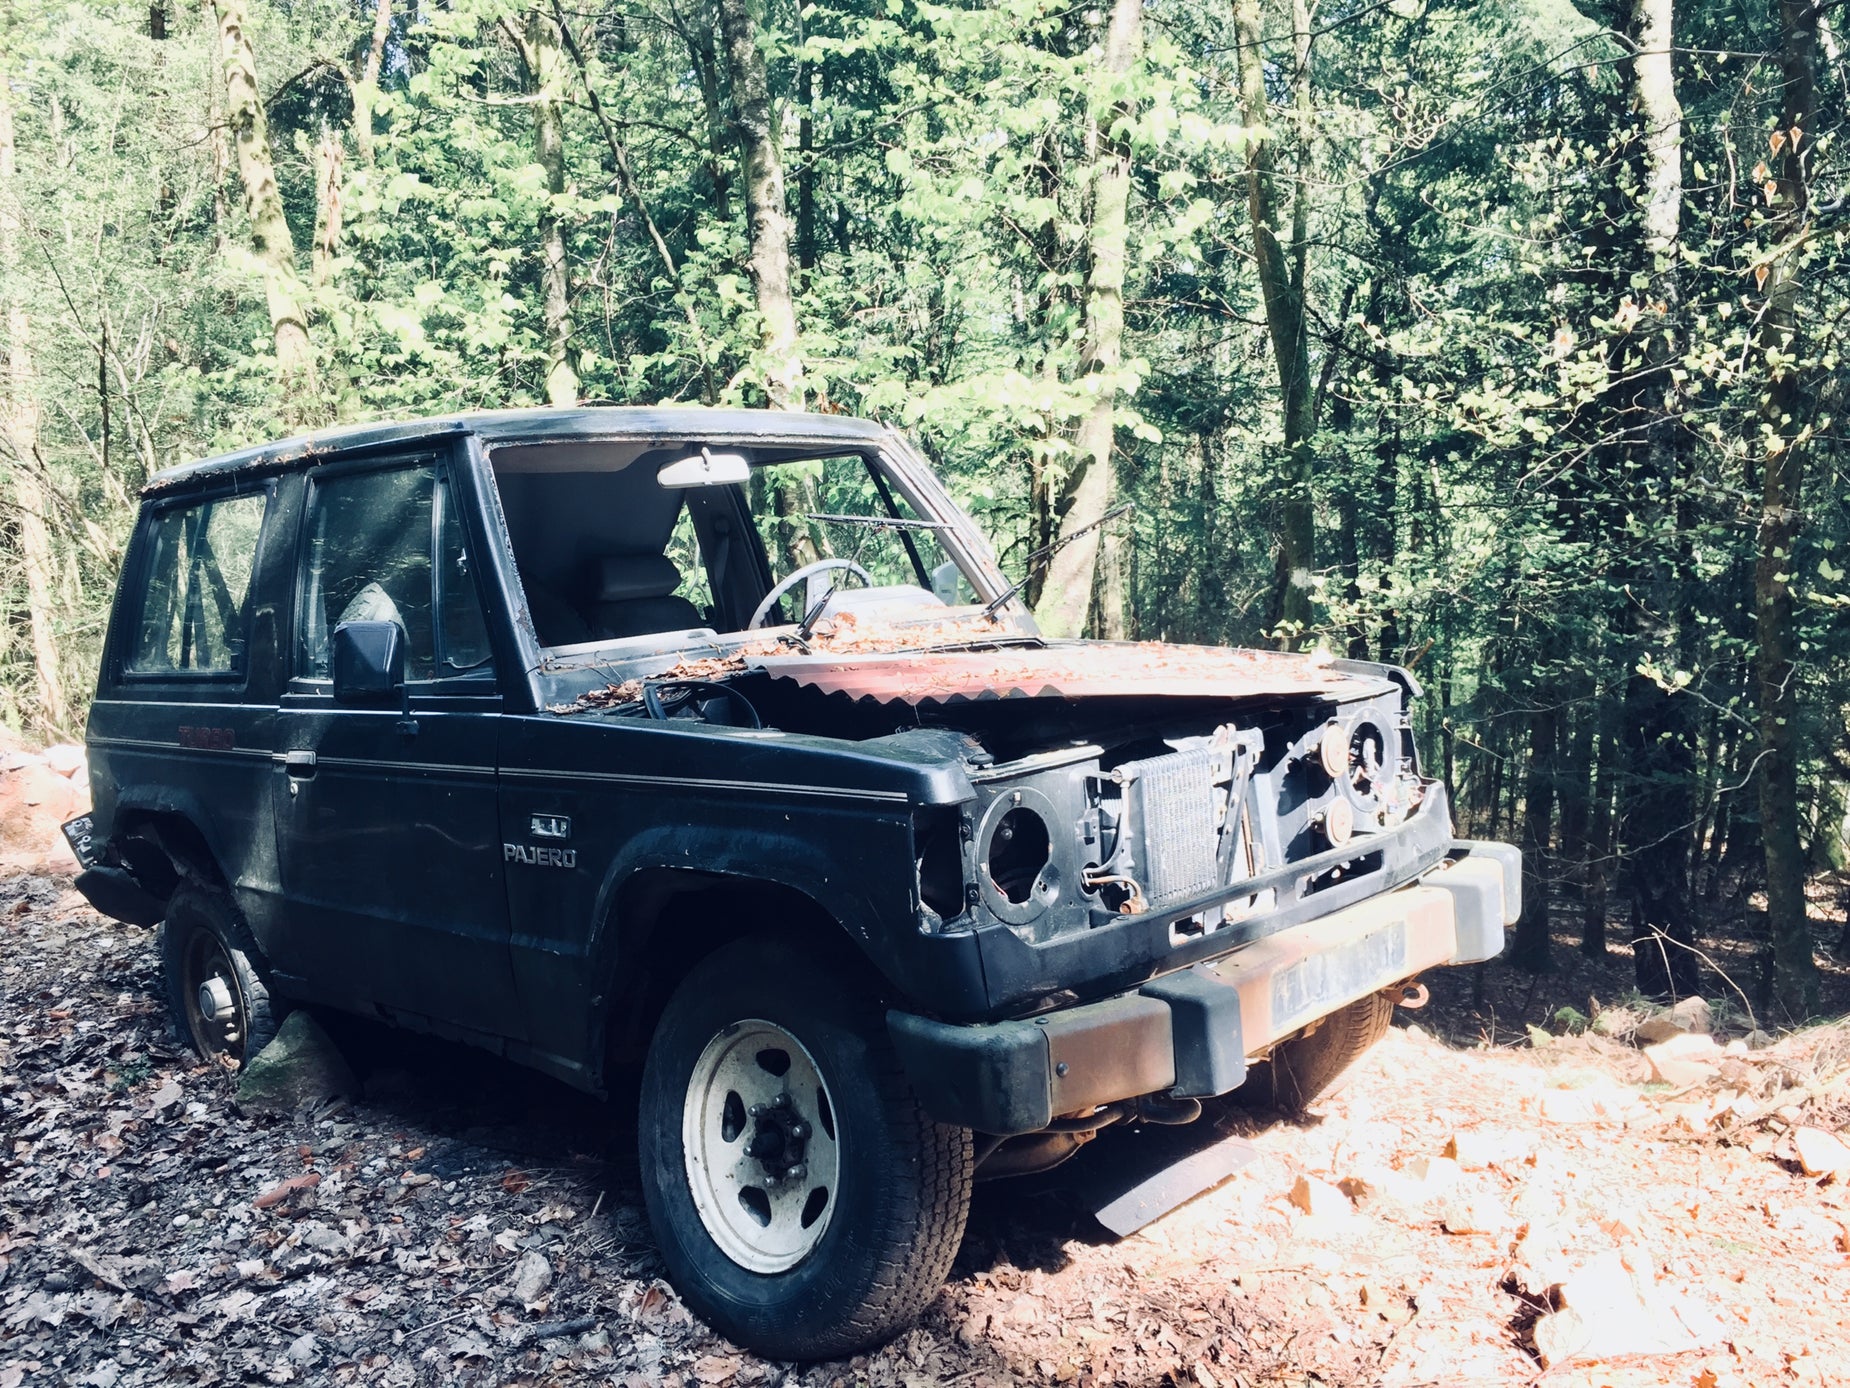 an old, rusted jeep in the forest